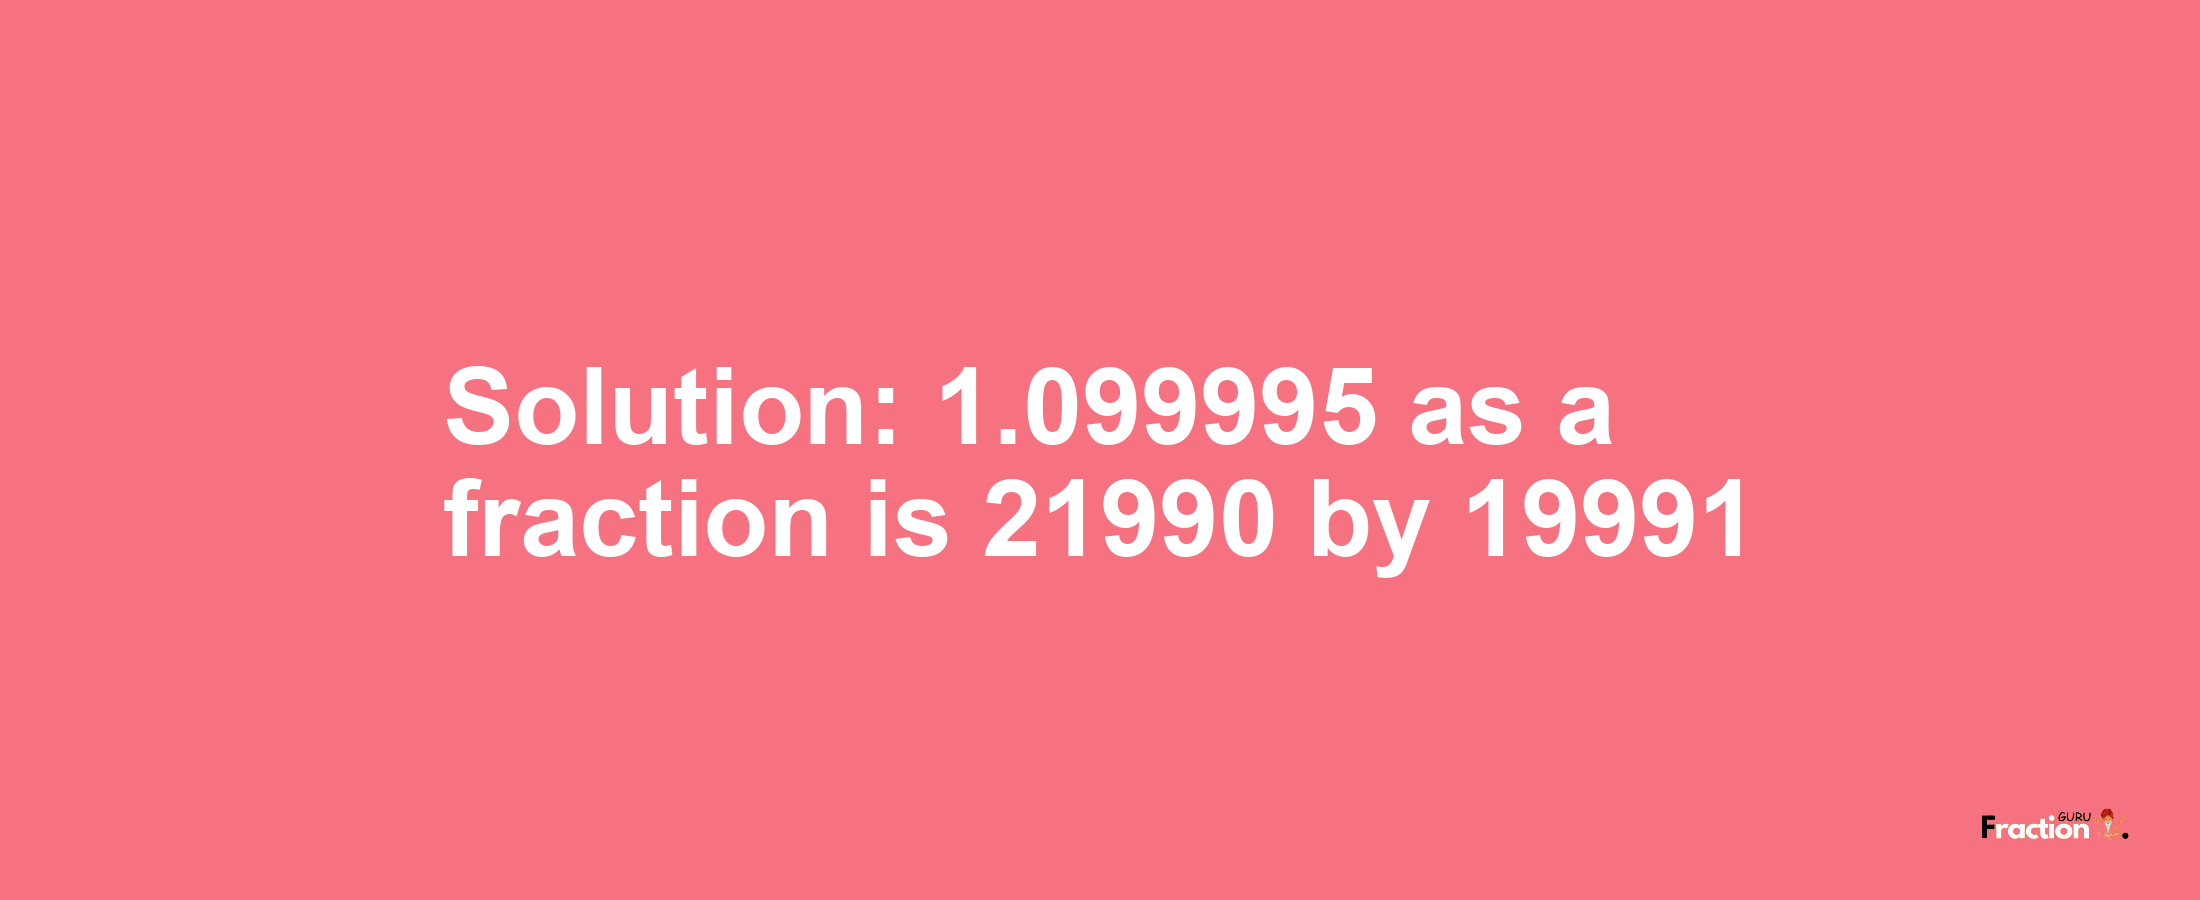 Solution:1.099995 as a fraction is 21990/19991